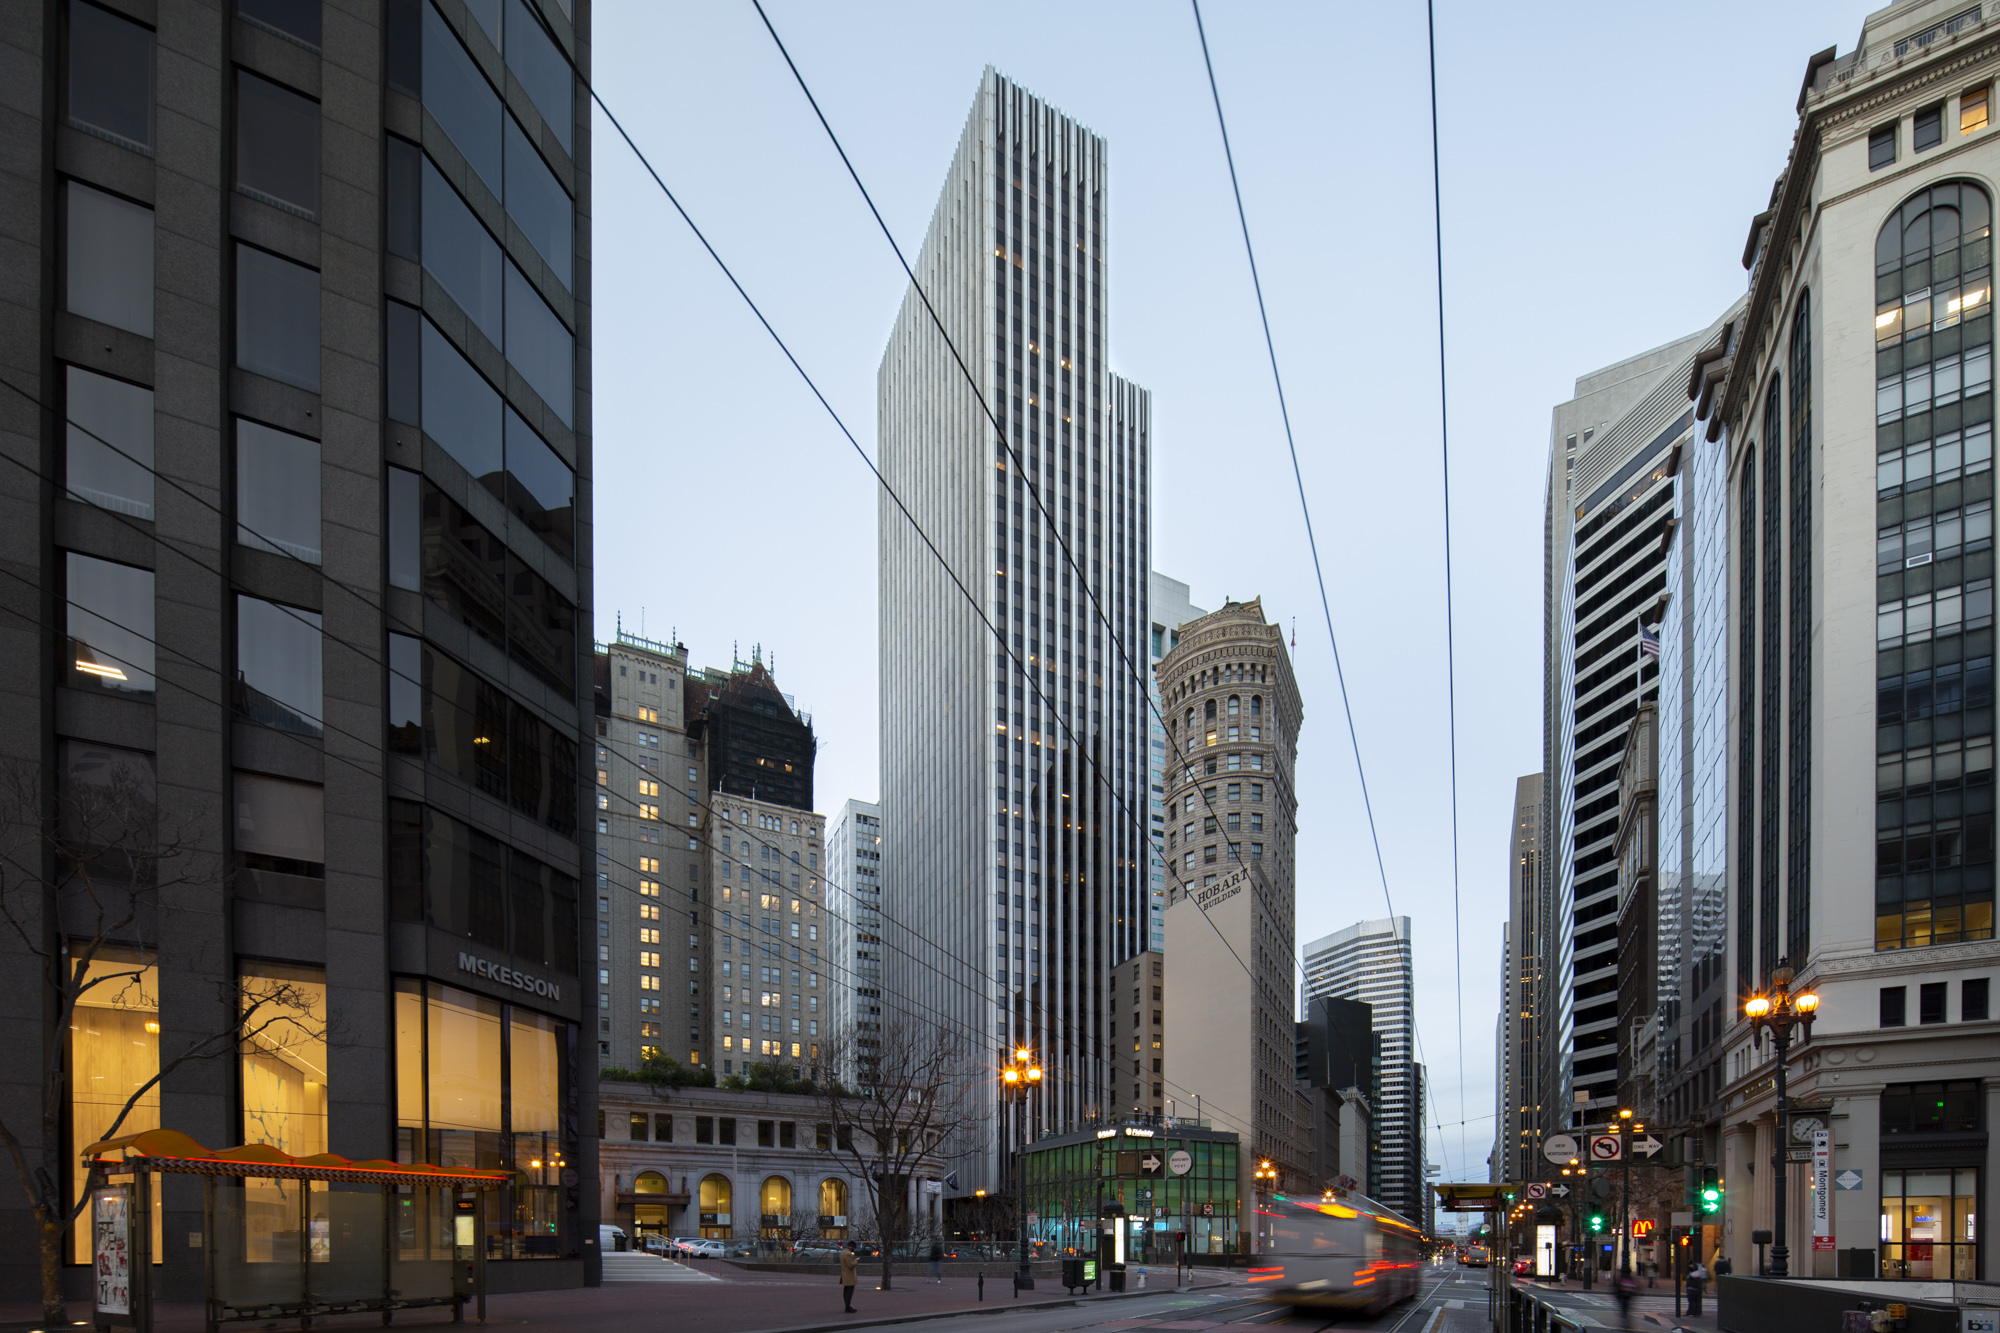 1 Post Street on the far left, 44 Montgomery Street in the center, image by Andrew Campbell Nelson